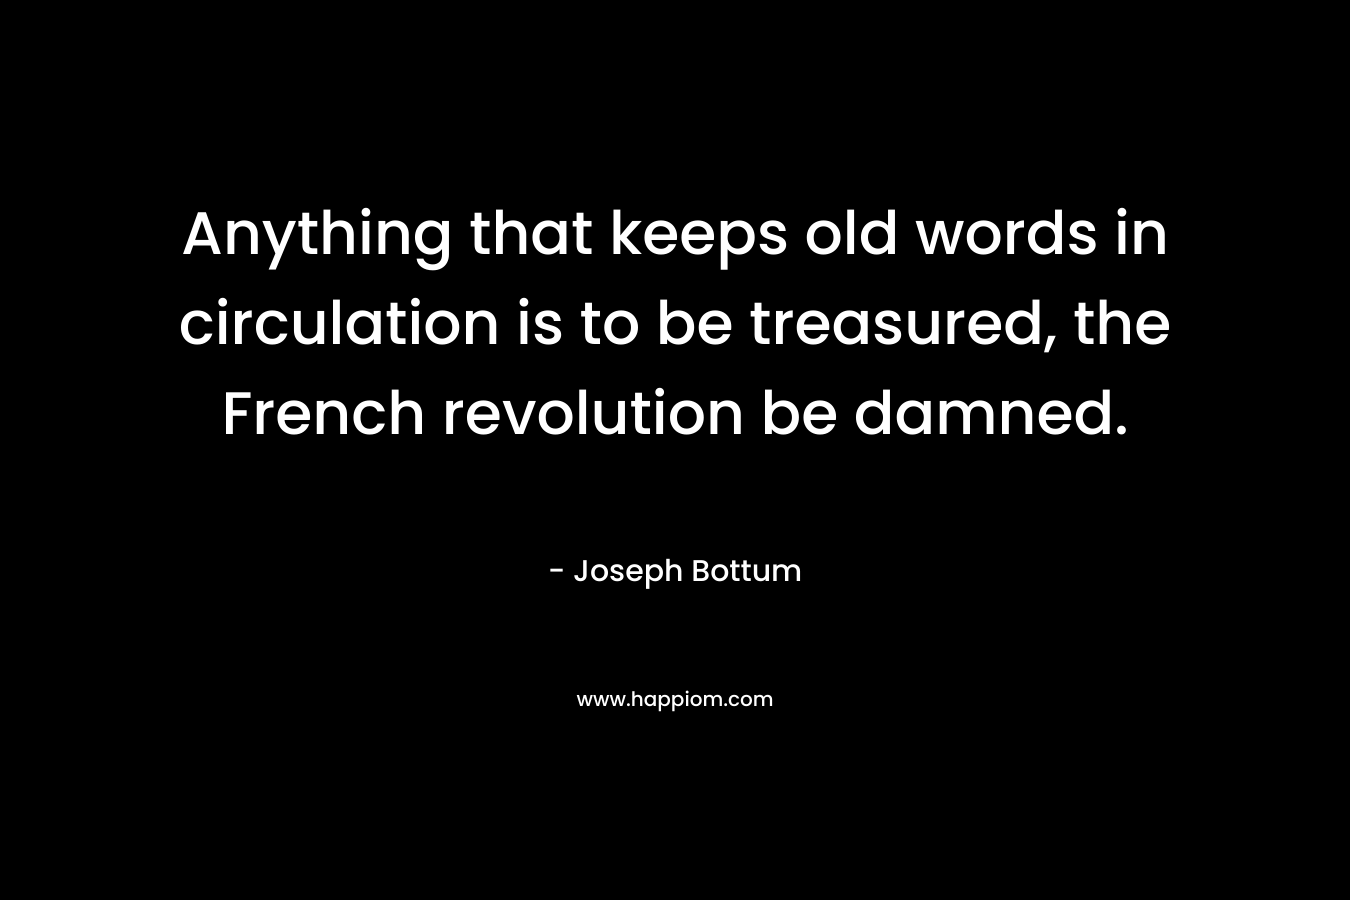 Anything that keeps old words in circulation is to be treasured, the French revolution be damned.